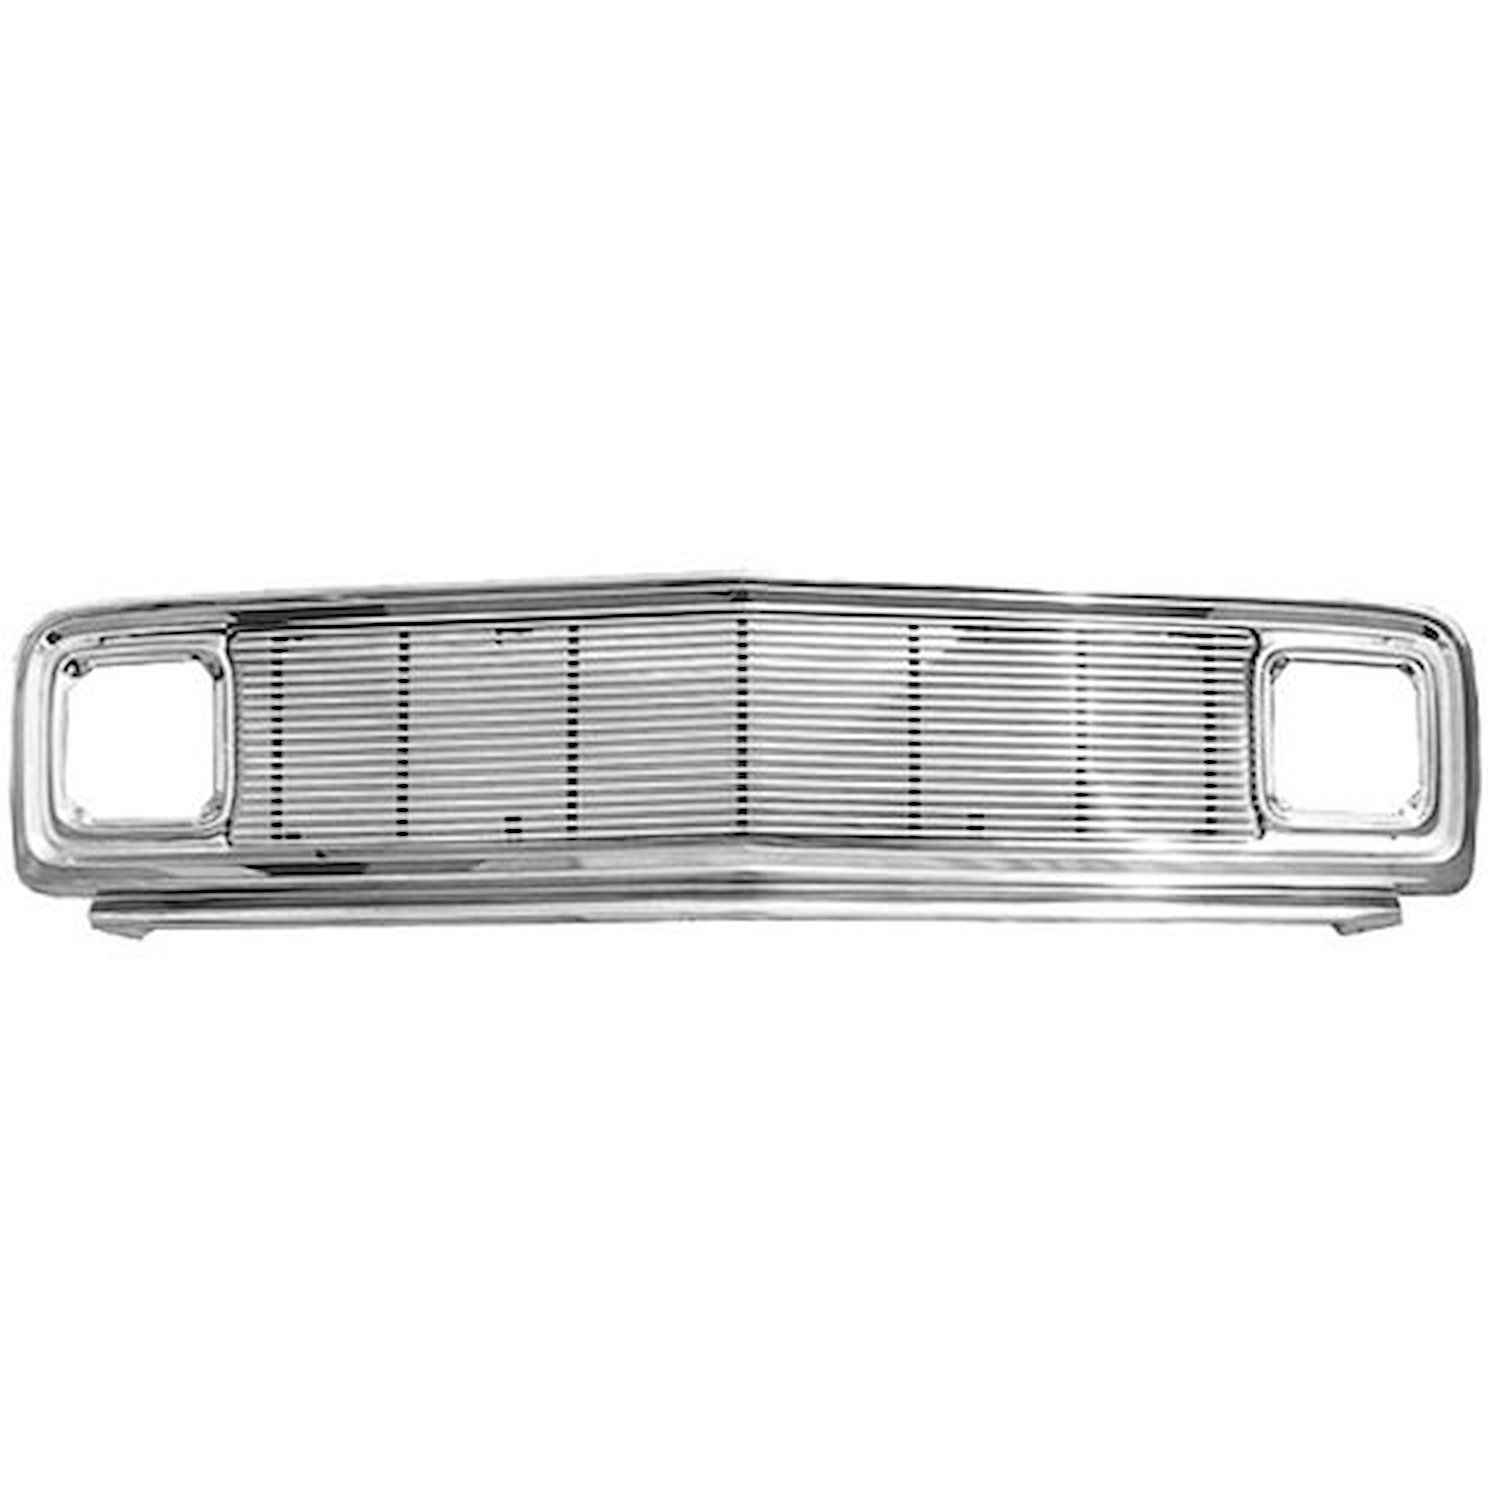 OE Reproduction Grille 1969-1972 Chevrolet Pickup